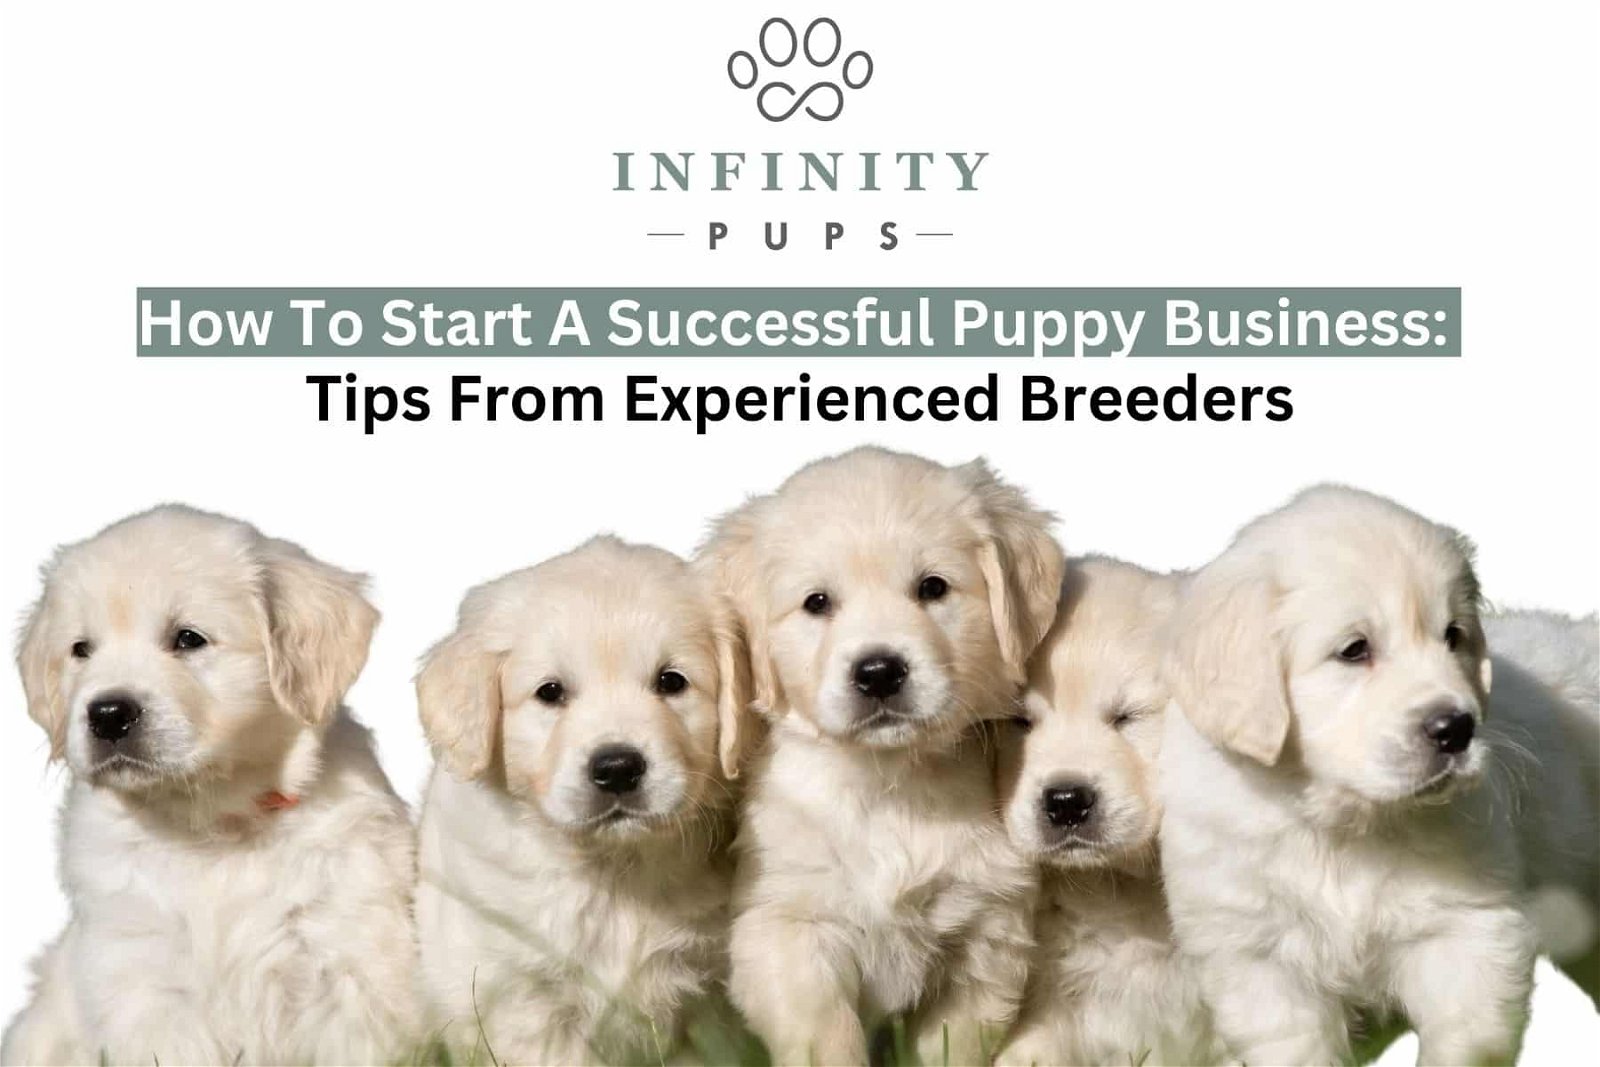 How To Start A Successful Puppy Business: Tips From Experienced Breeders 3